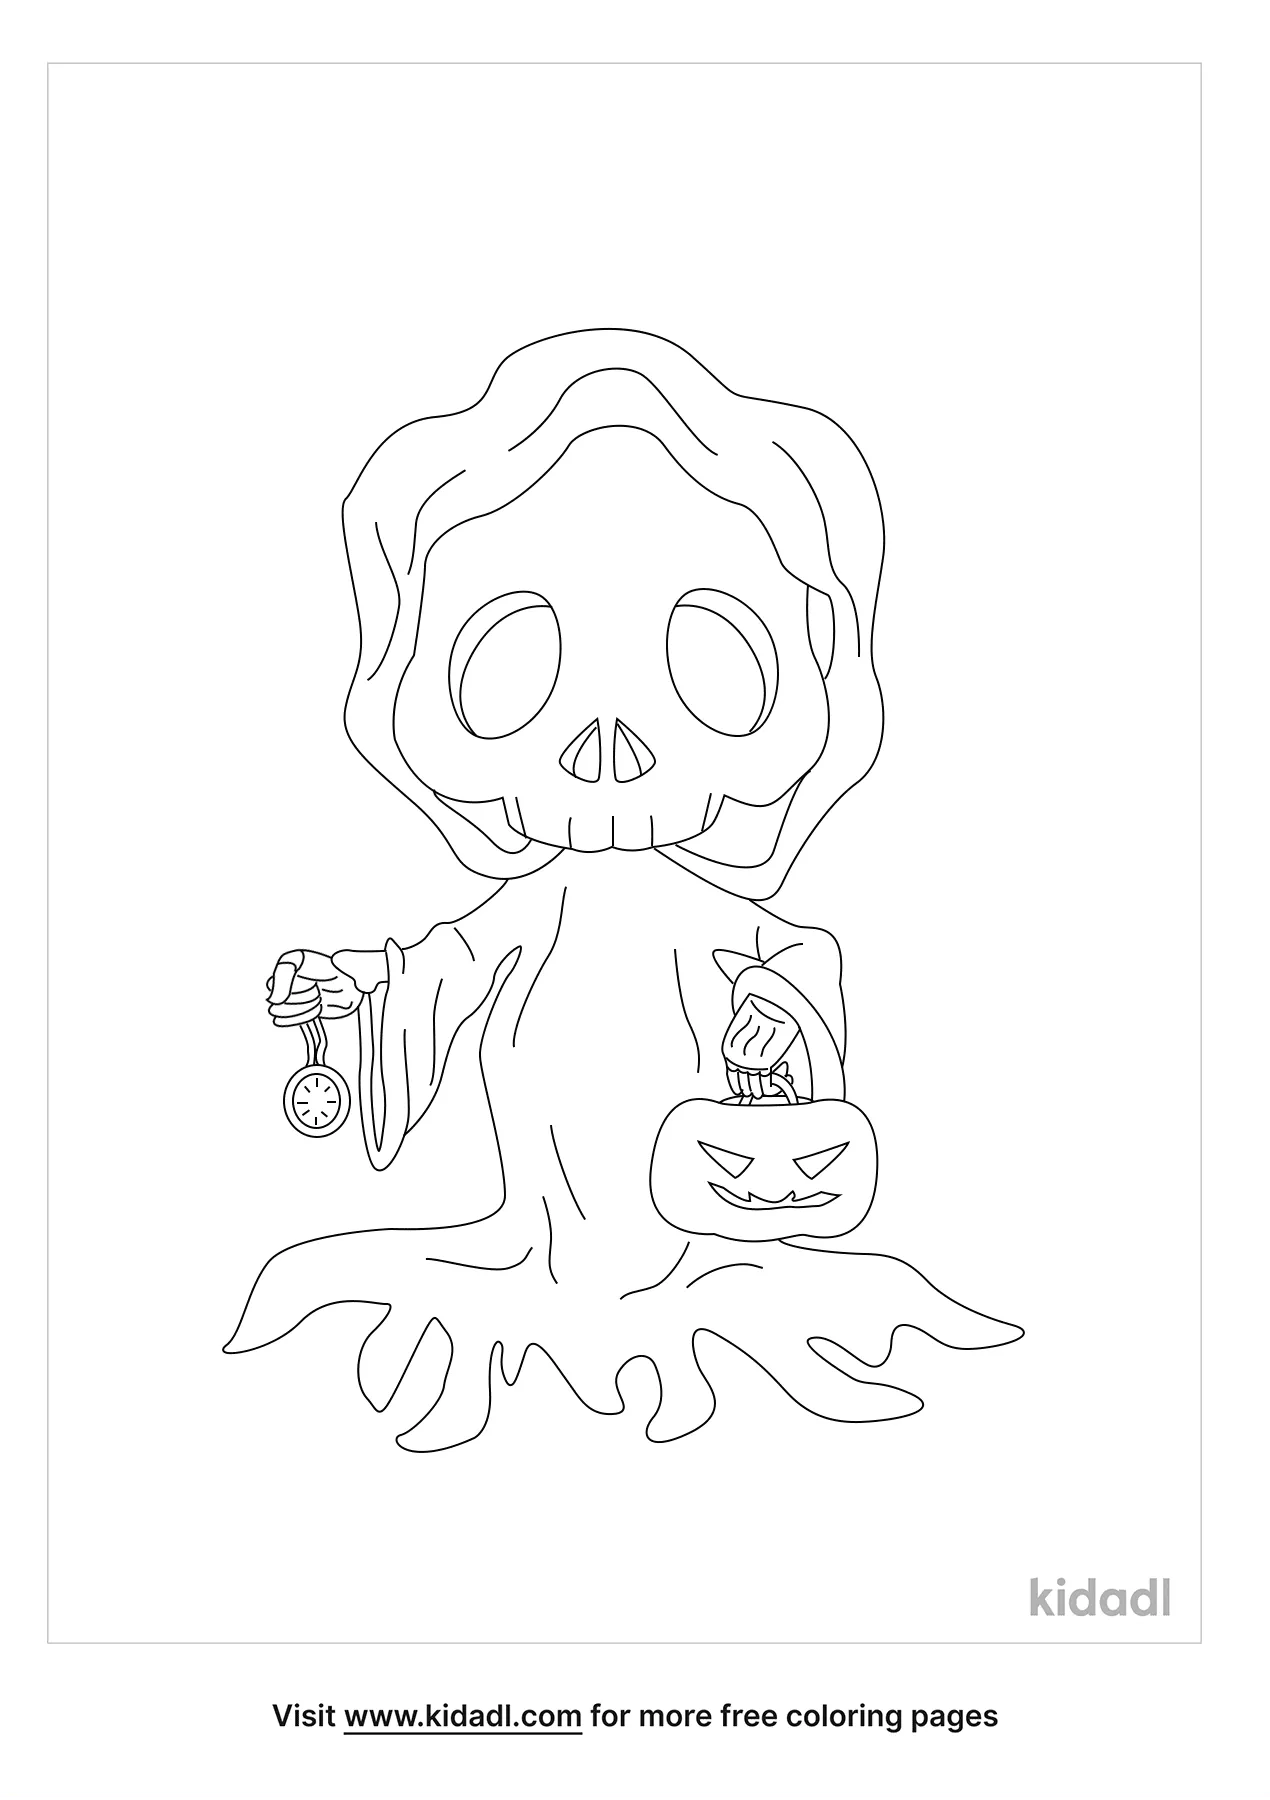 Reaper Skeleton Coloring Page